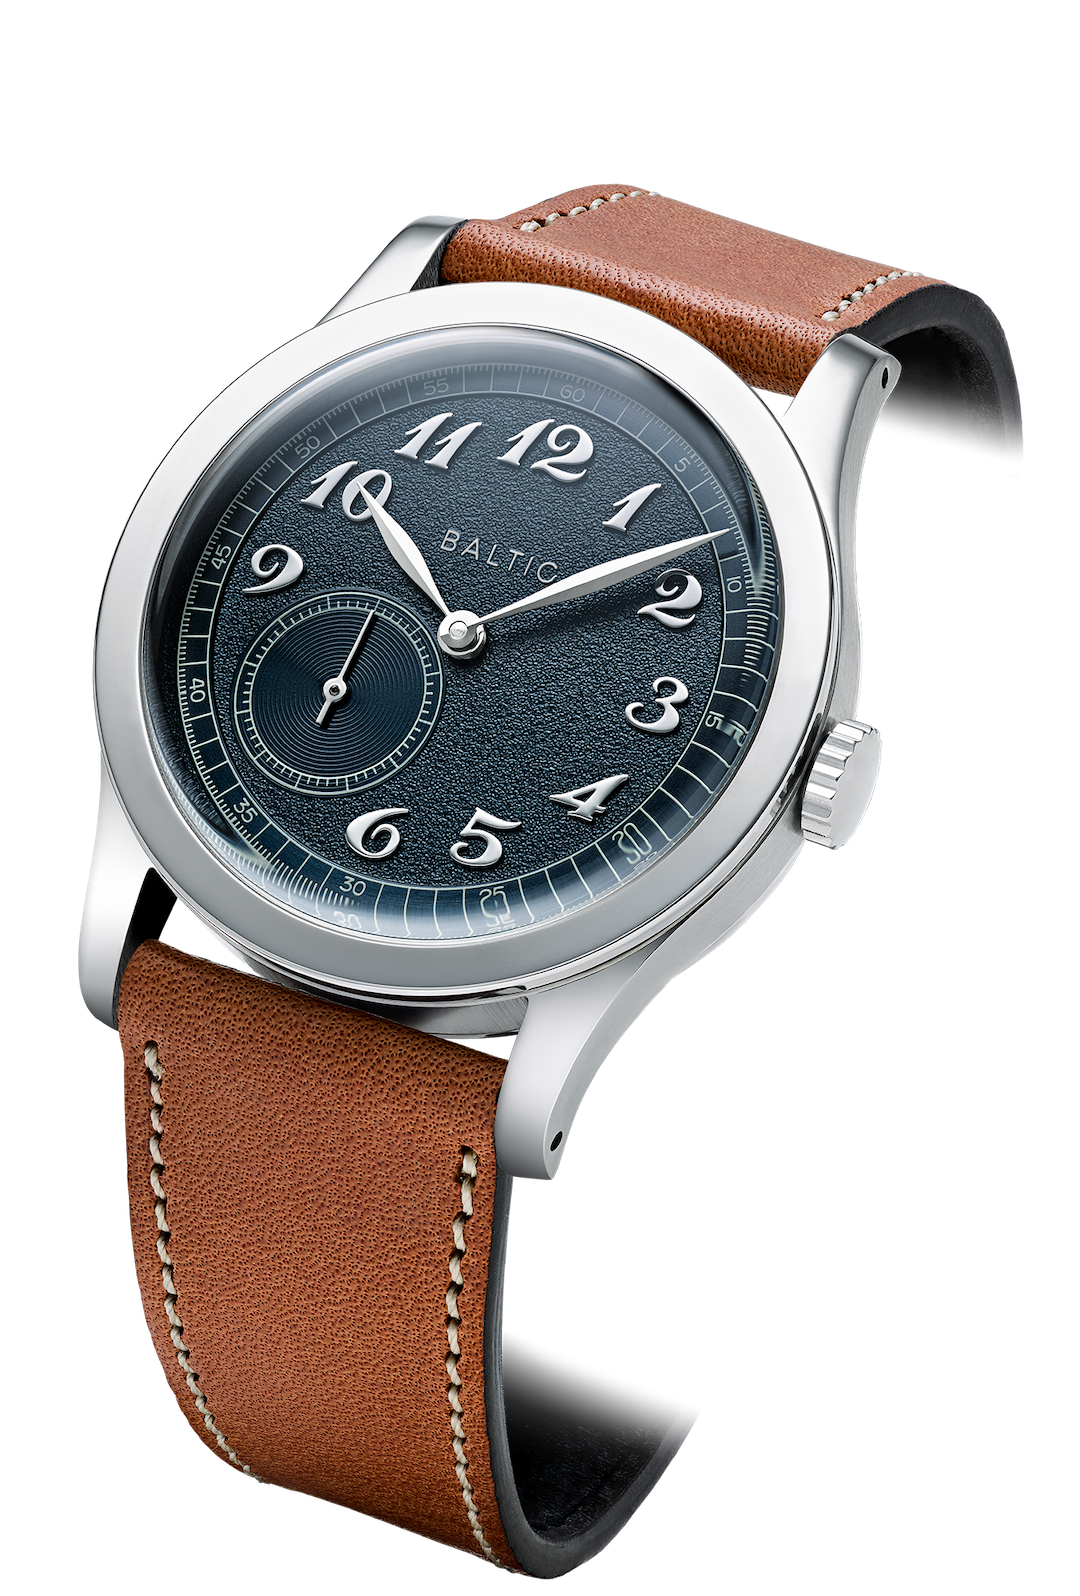 Baltic MR01 Blue 36mm - Brown Leather Strap